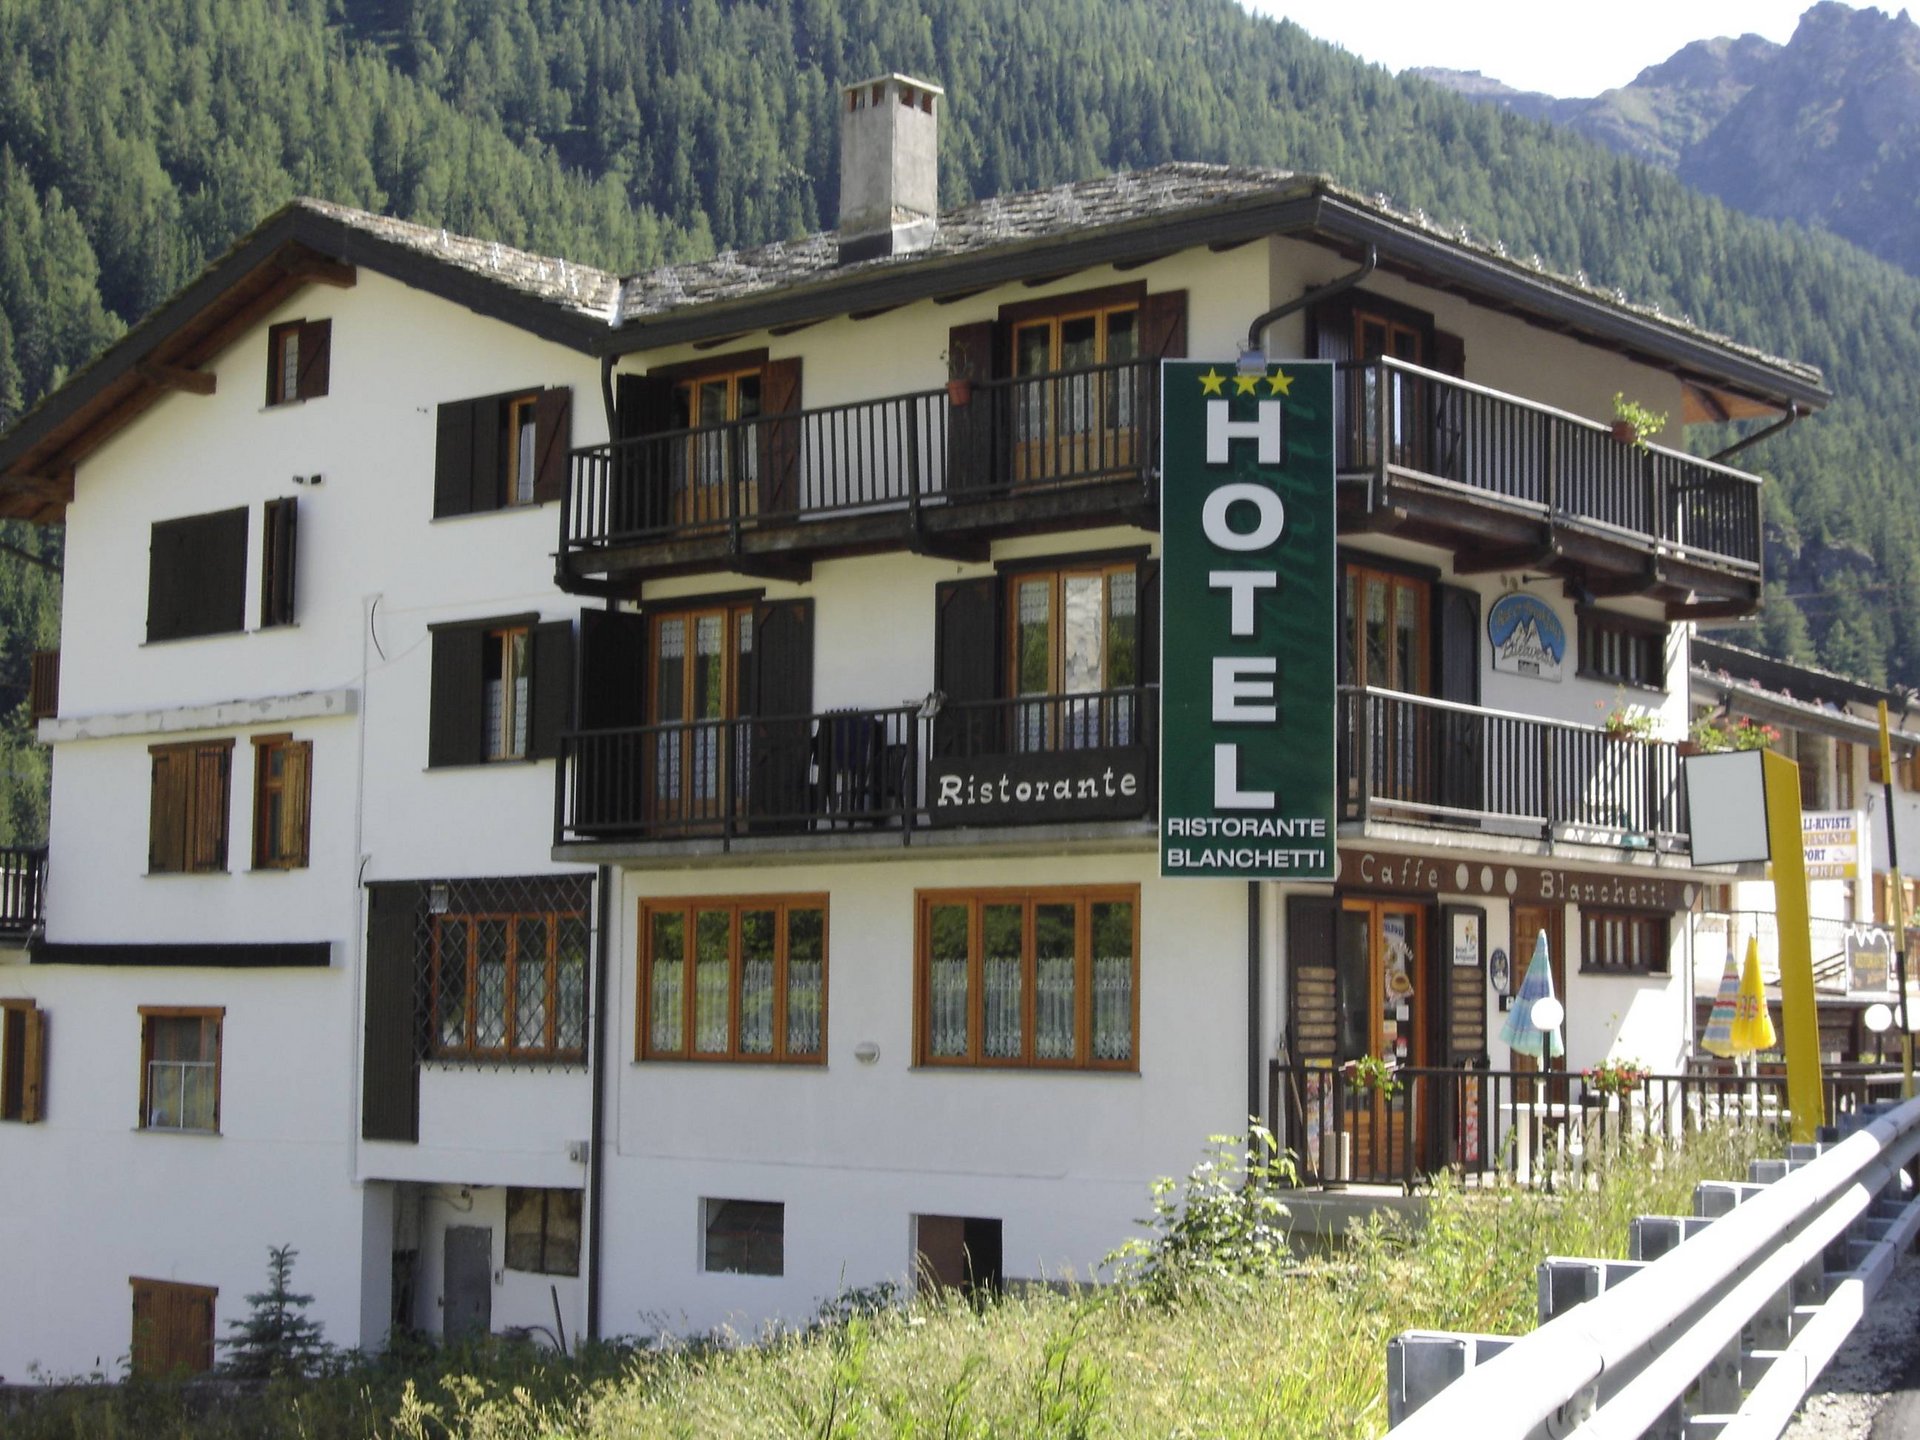 Ceresole Reale – the kingdom of the ibex